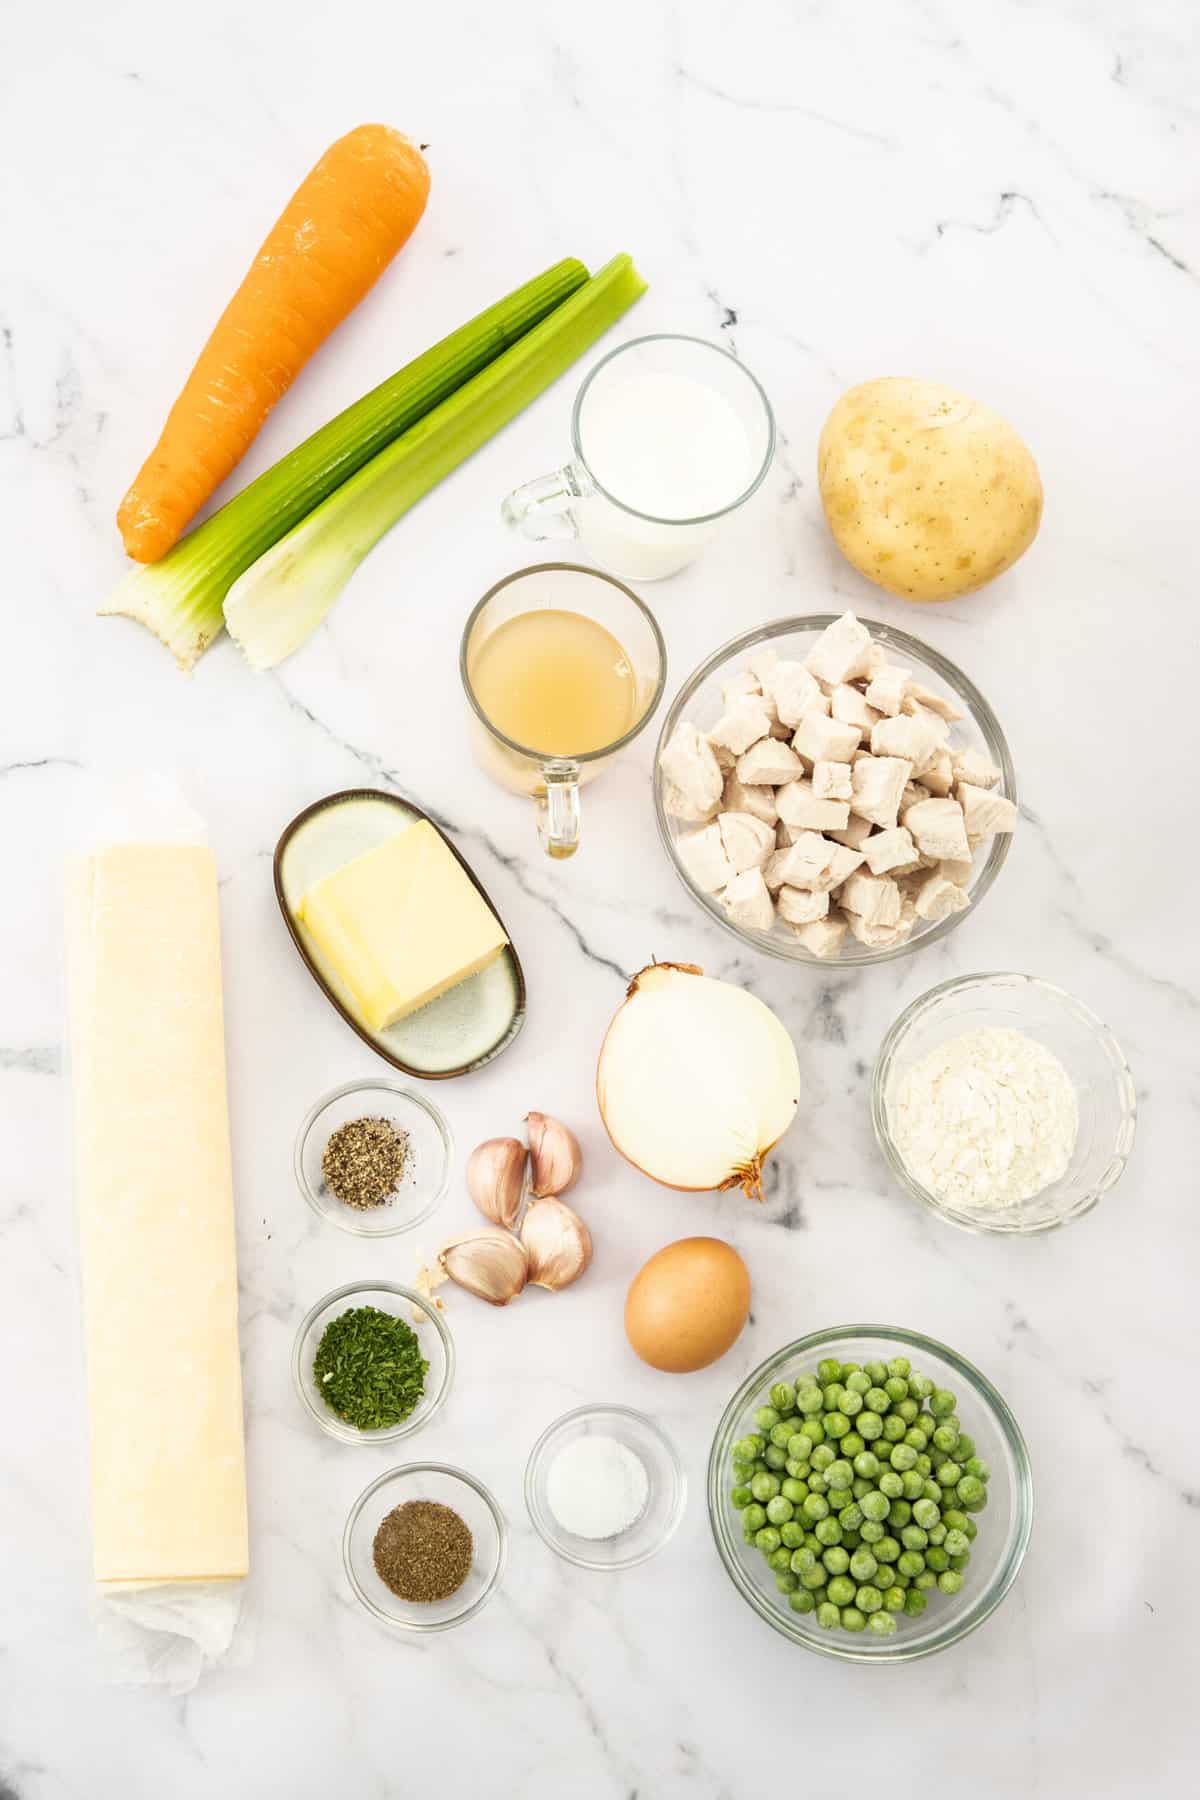 a bowl of frozen peas, carrots, celery, turkey, butter, and other ingredients on a white board.